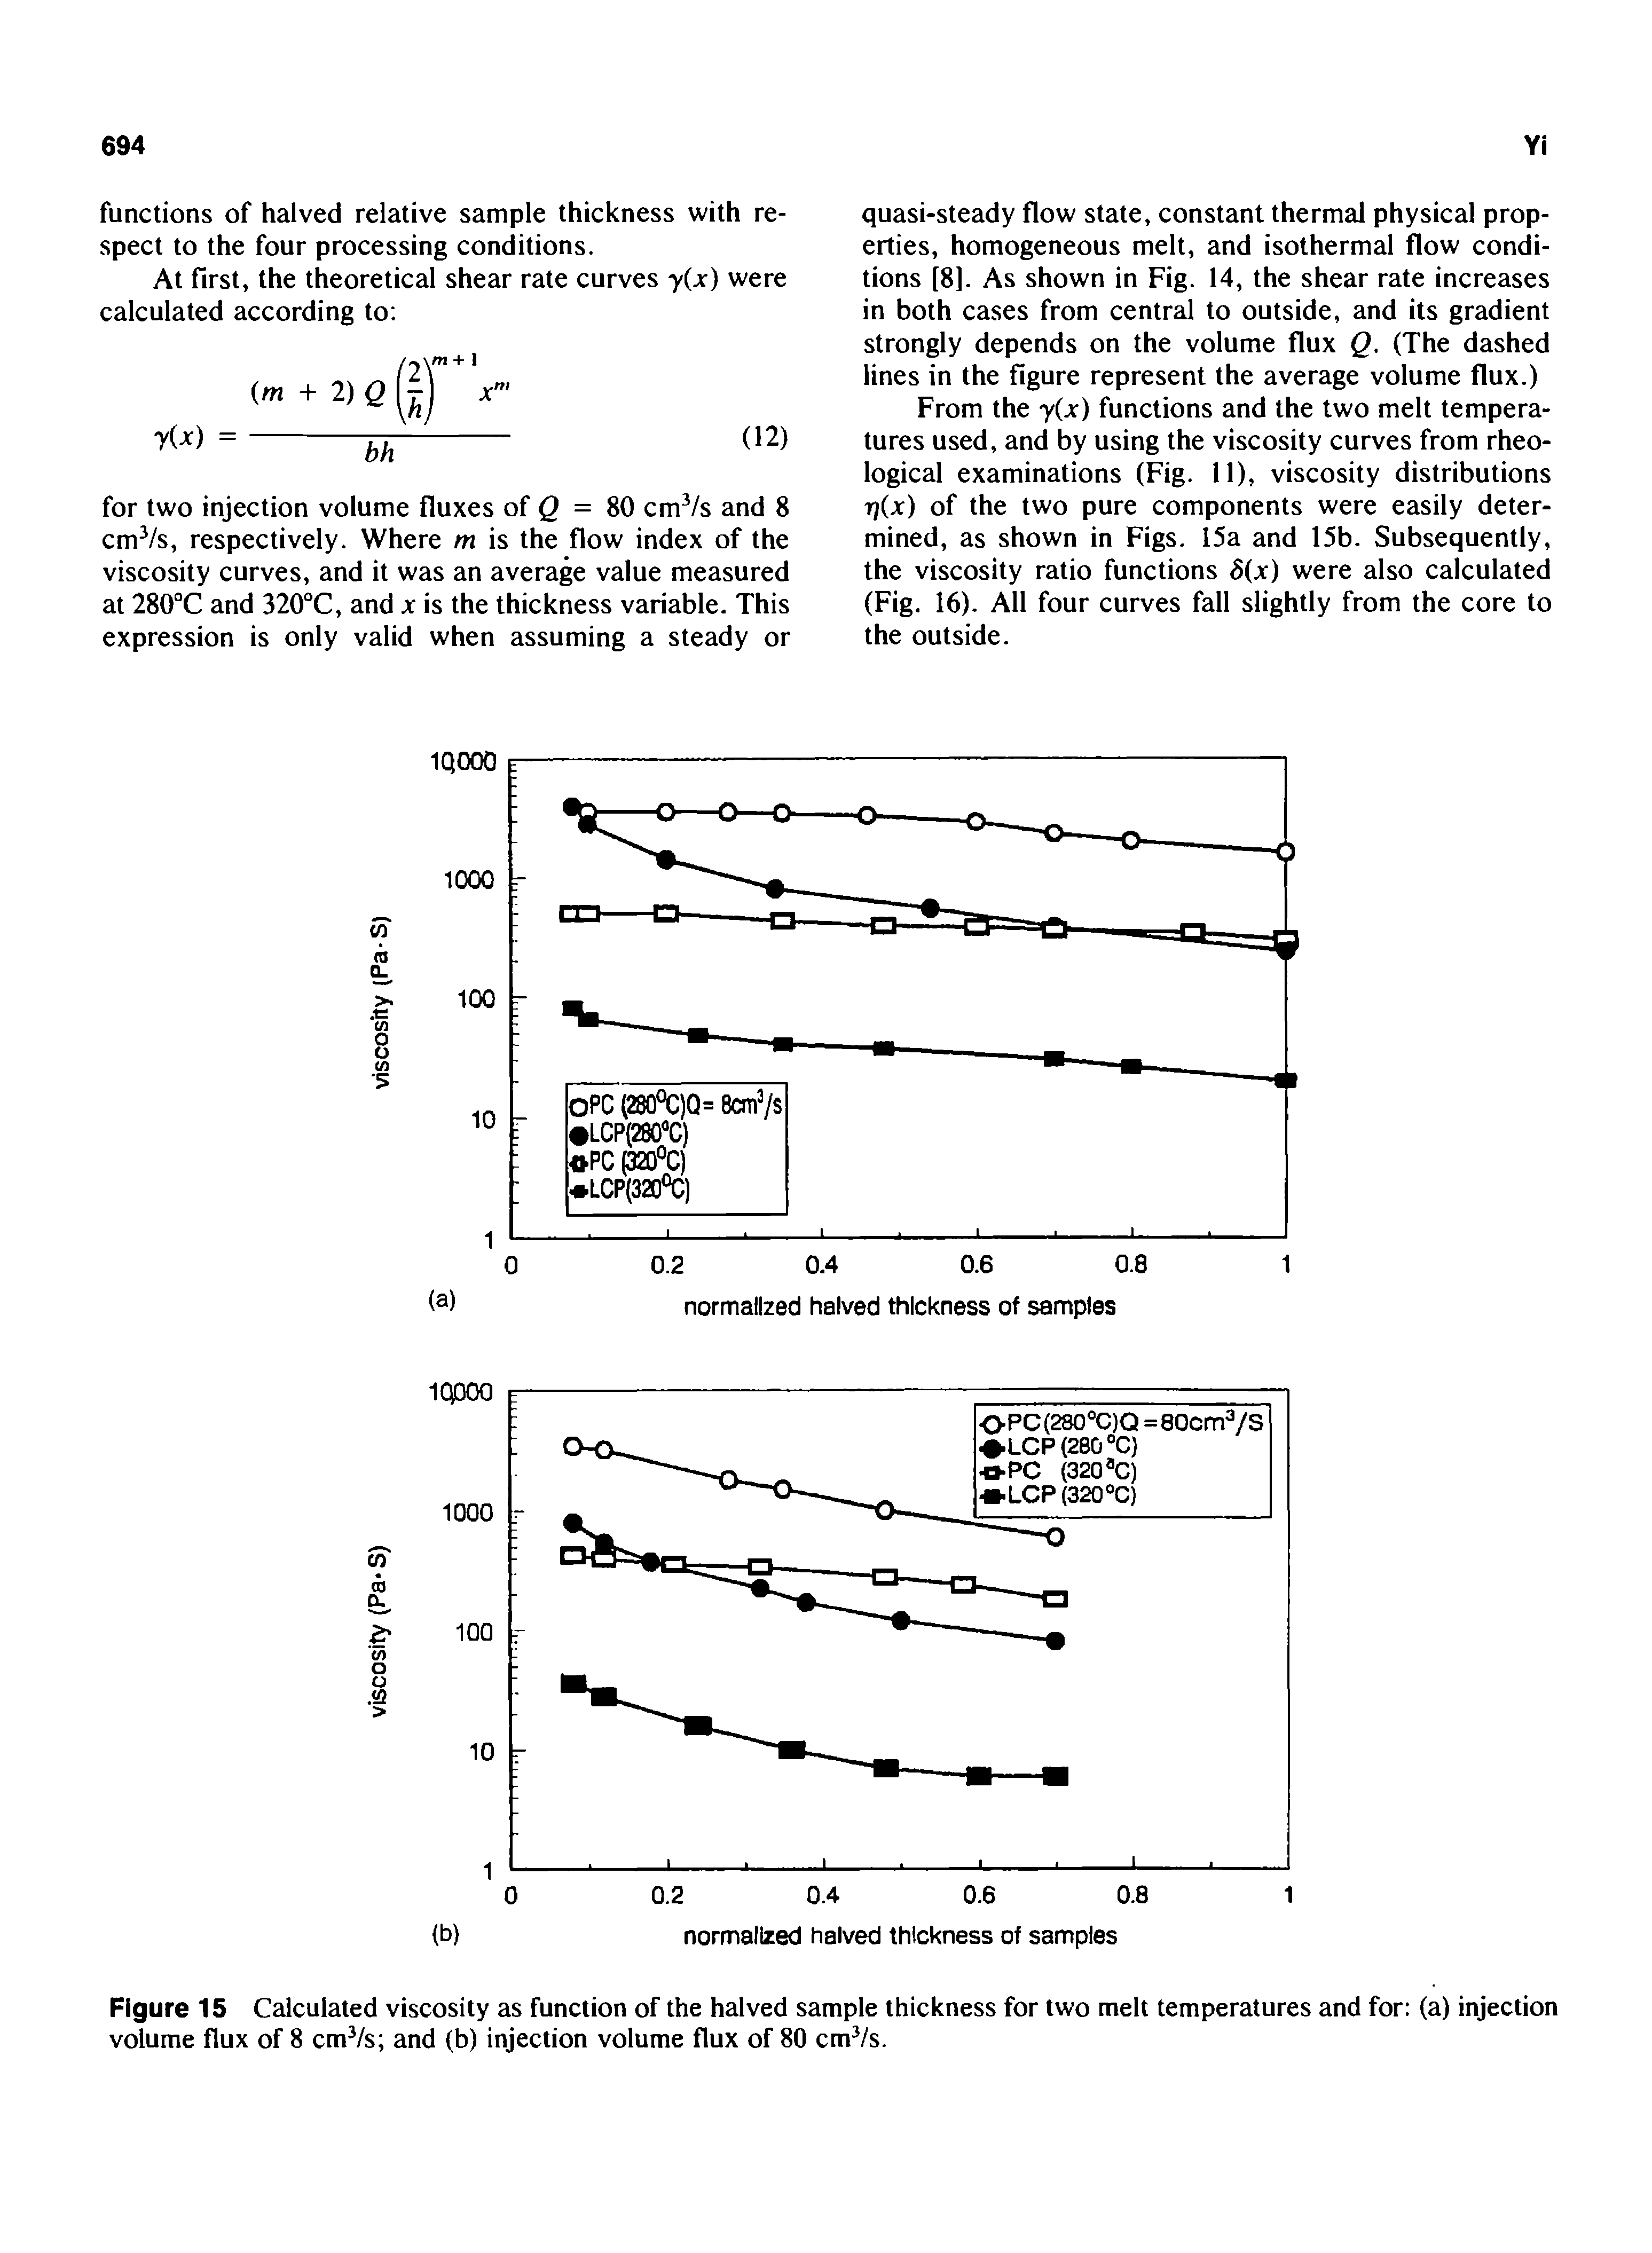 Figure 15 Calculated viscosity as function of the halved sample thickness for two melt temperatures and for (a) injection volume flux of 8 cmVs and (b) injection volume flux of 80 cm /s.